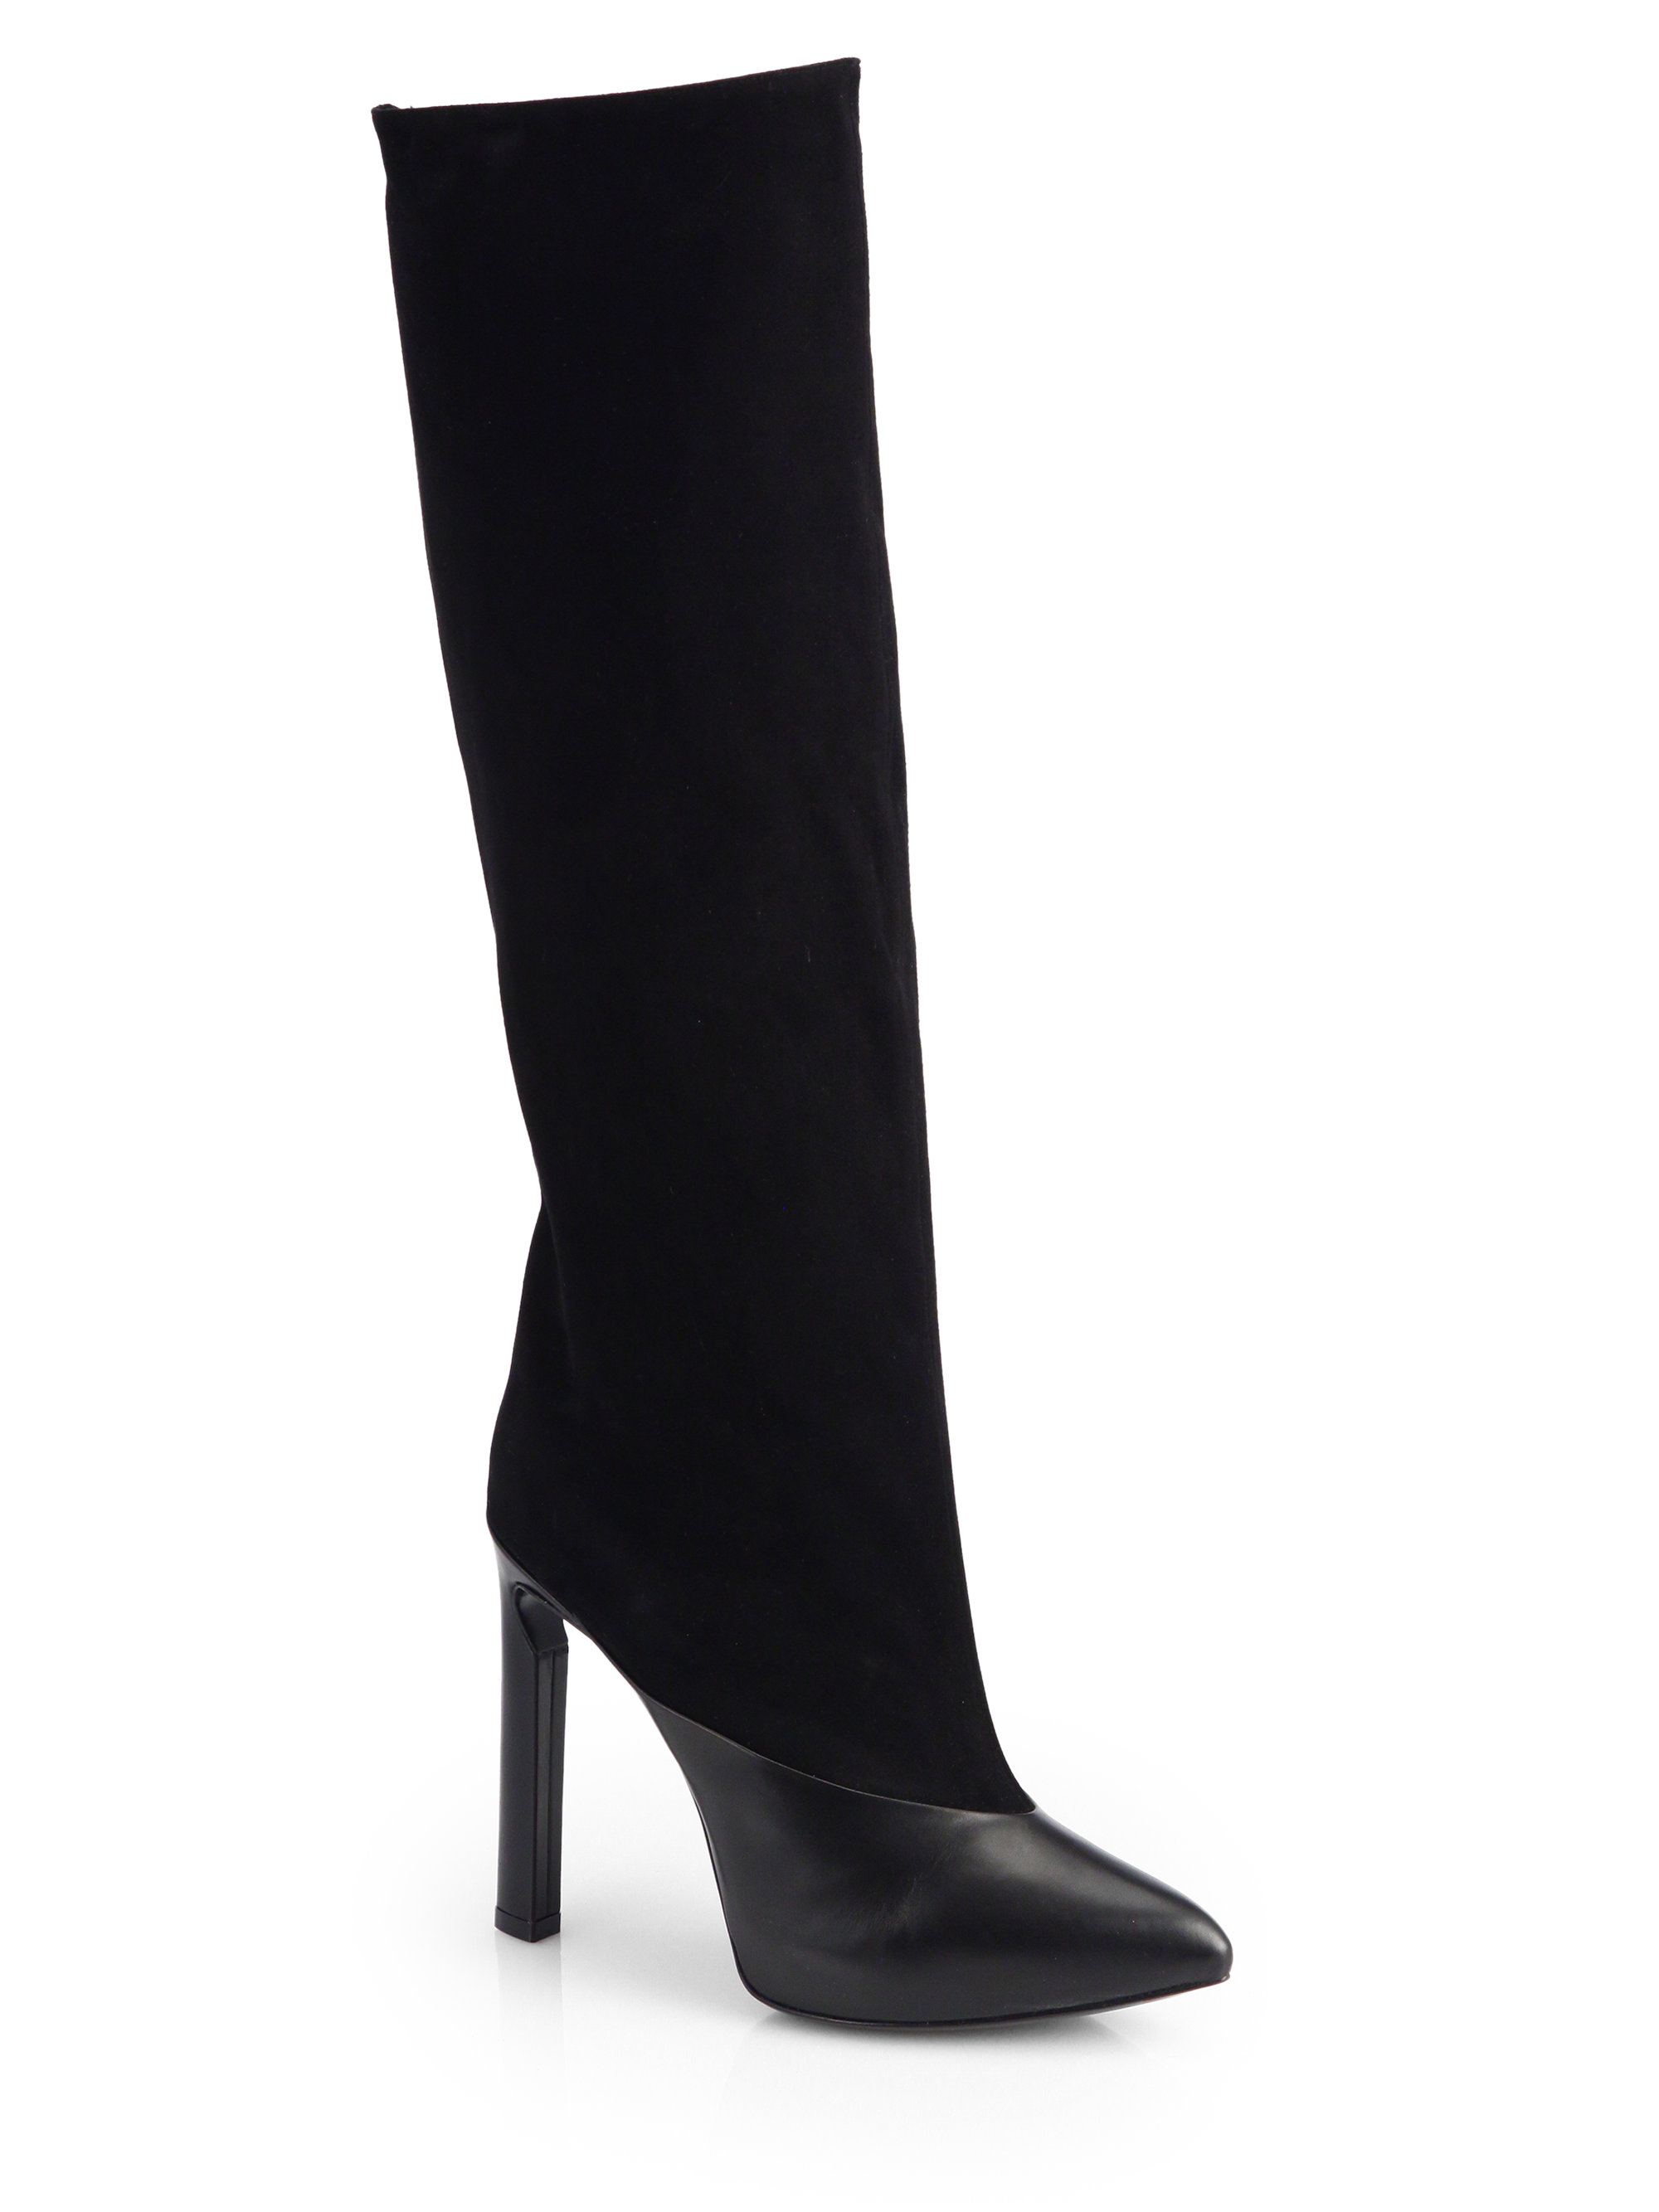 Lyst - Jimmy Choo Derive Suede & Leather Mixed Media Knee-high Boots in ...